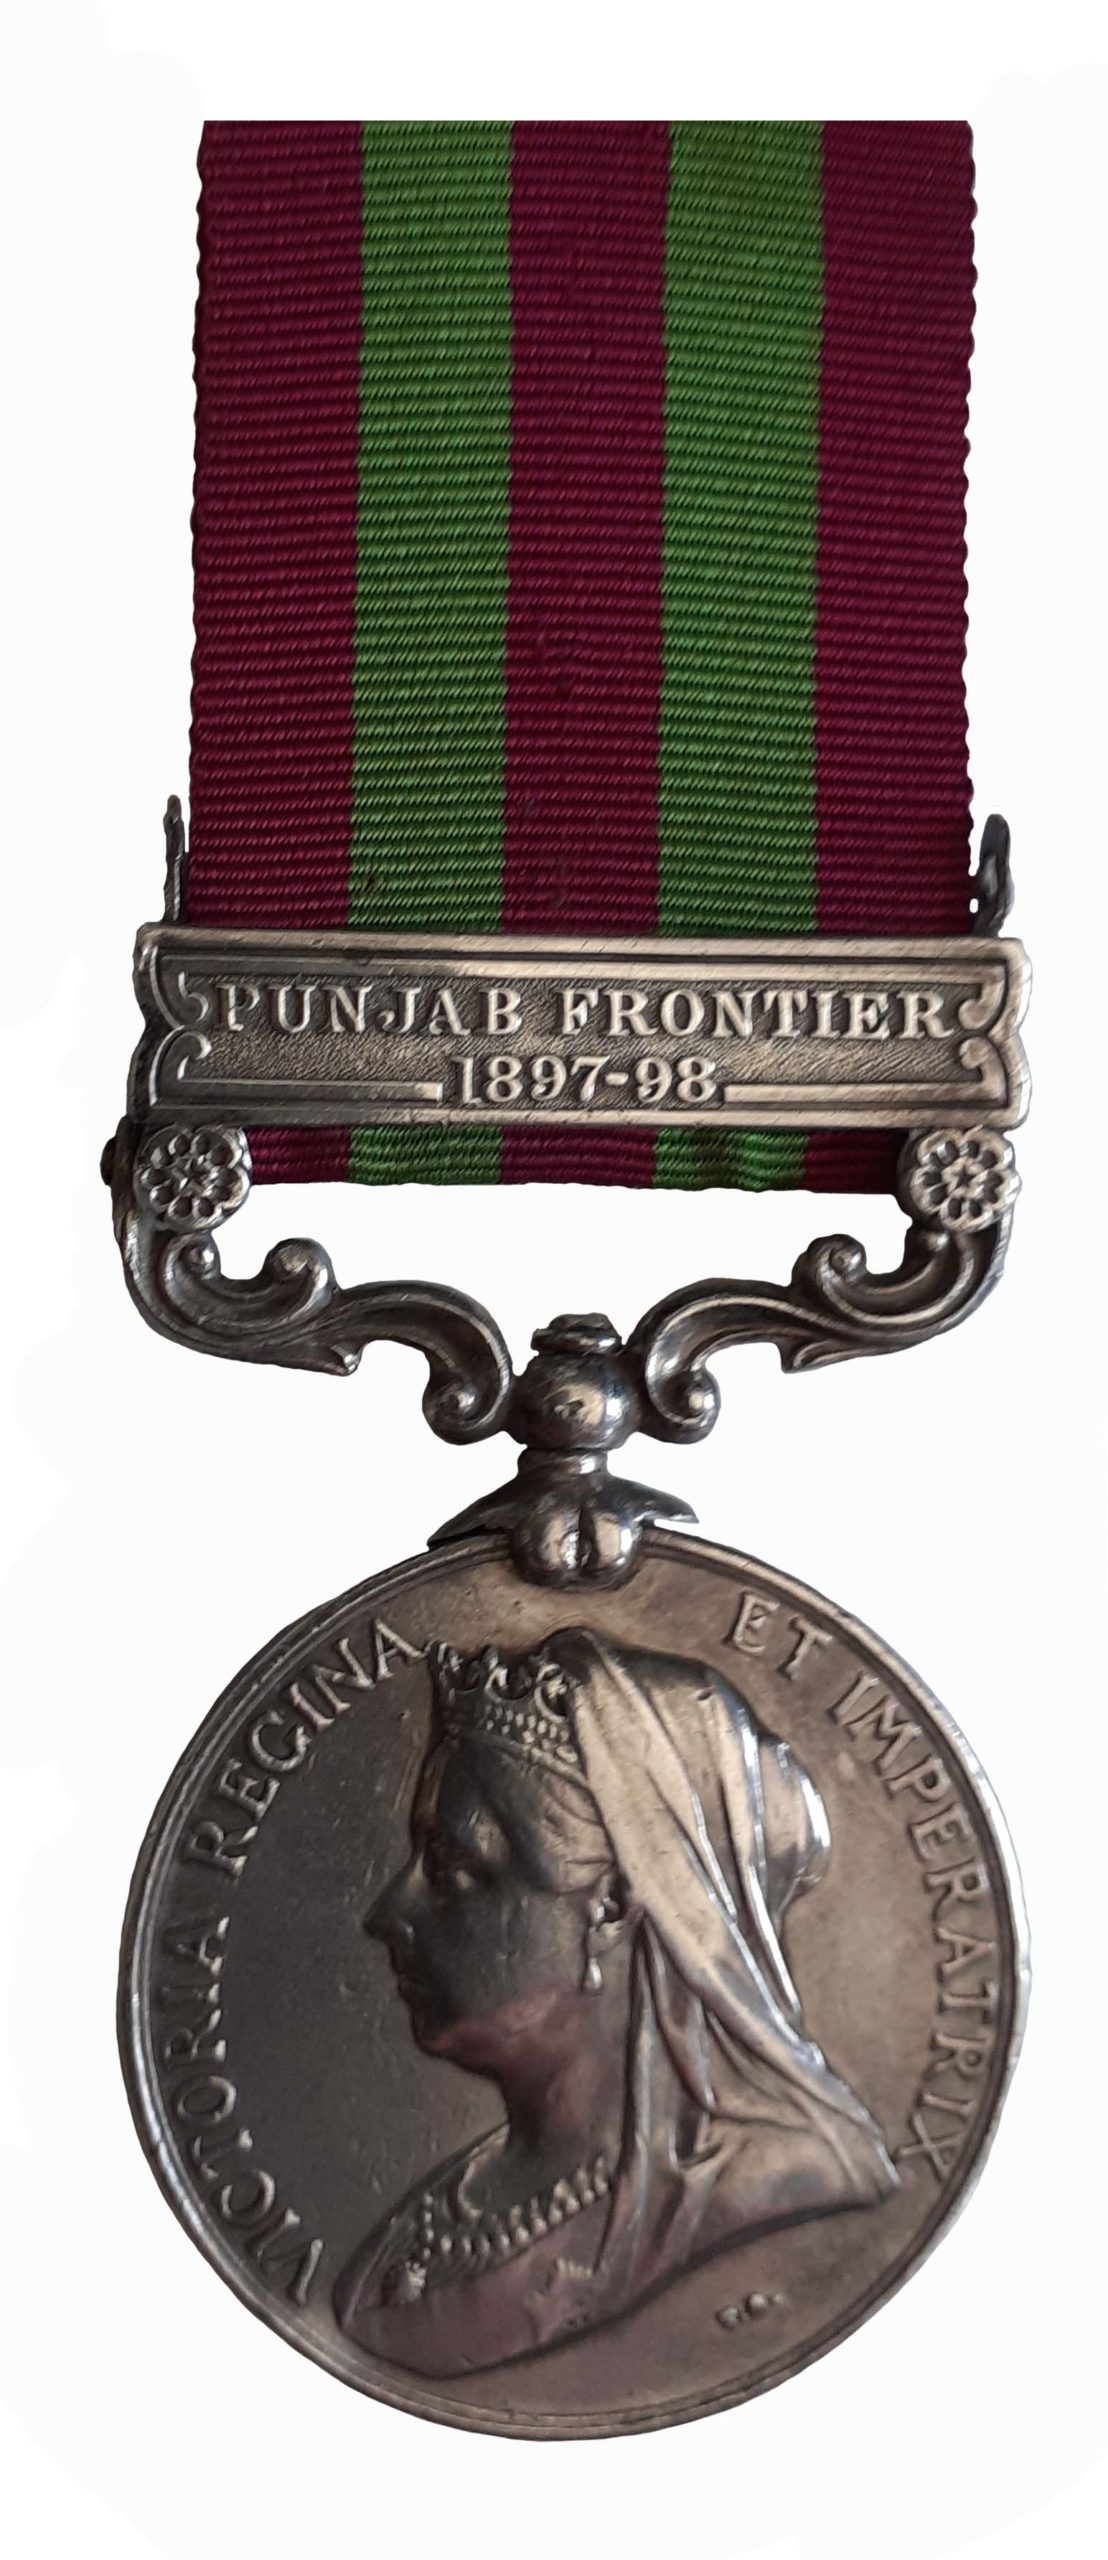 India Medal 1895-1902, QVR, one clasp, Punjab Frontier 1897-98, to Sepoy Bishan Singh